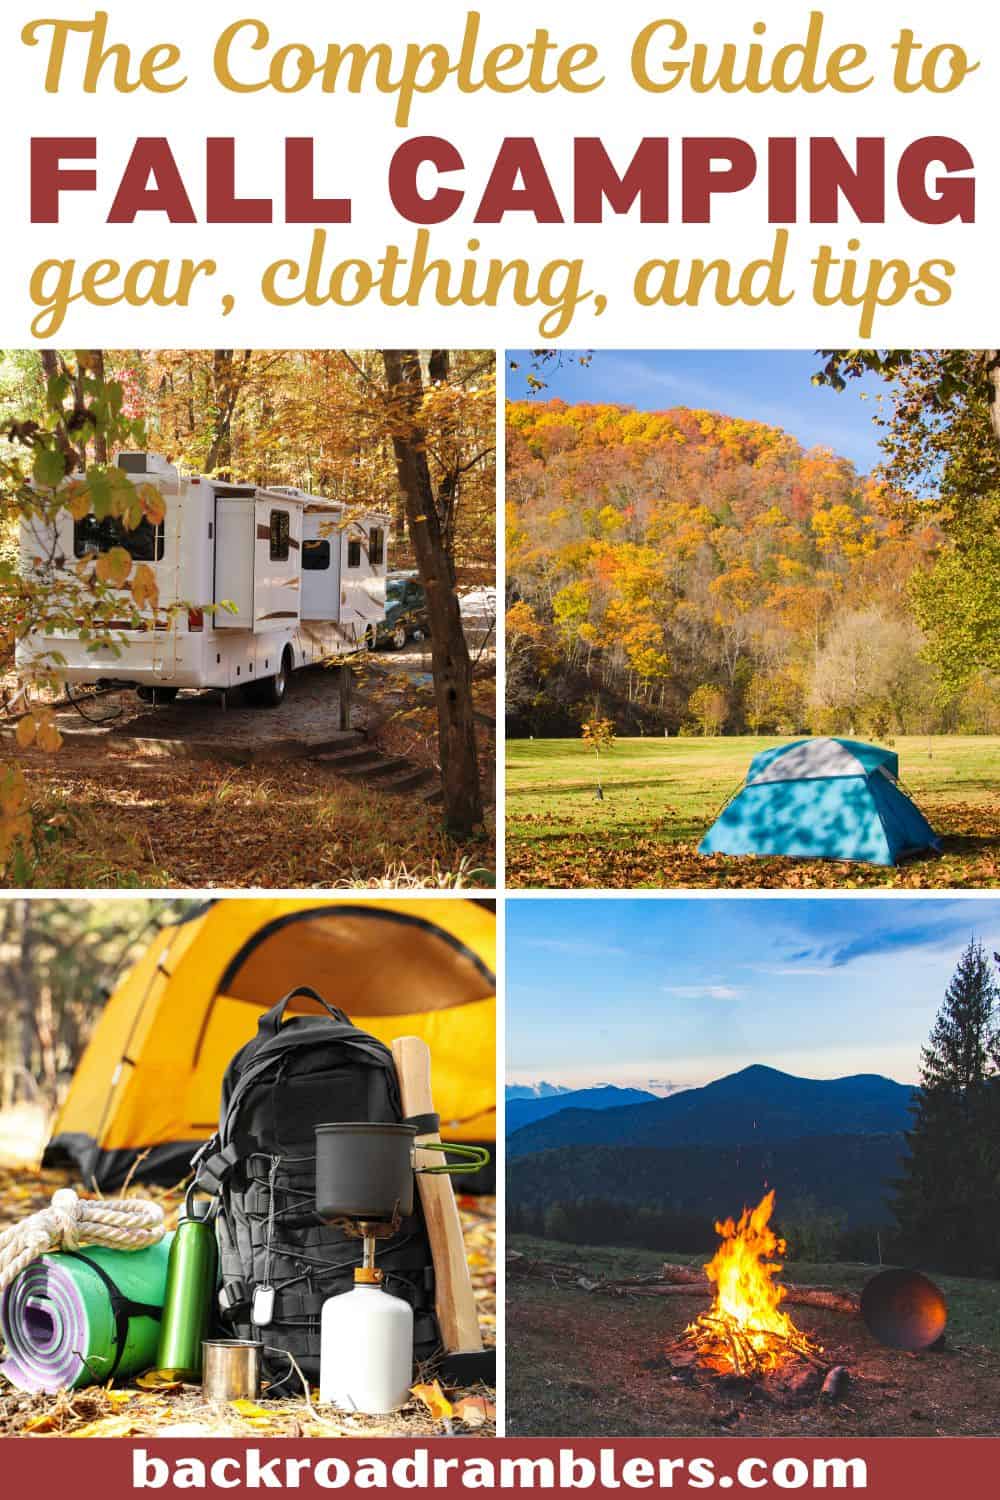 A collage of photos featuring fall camping.